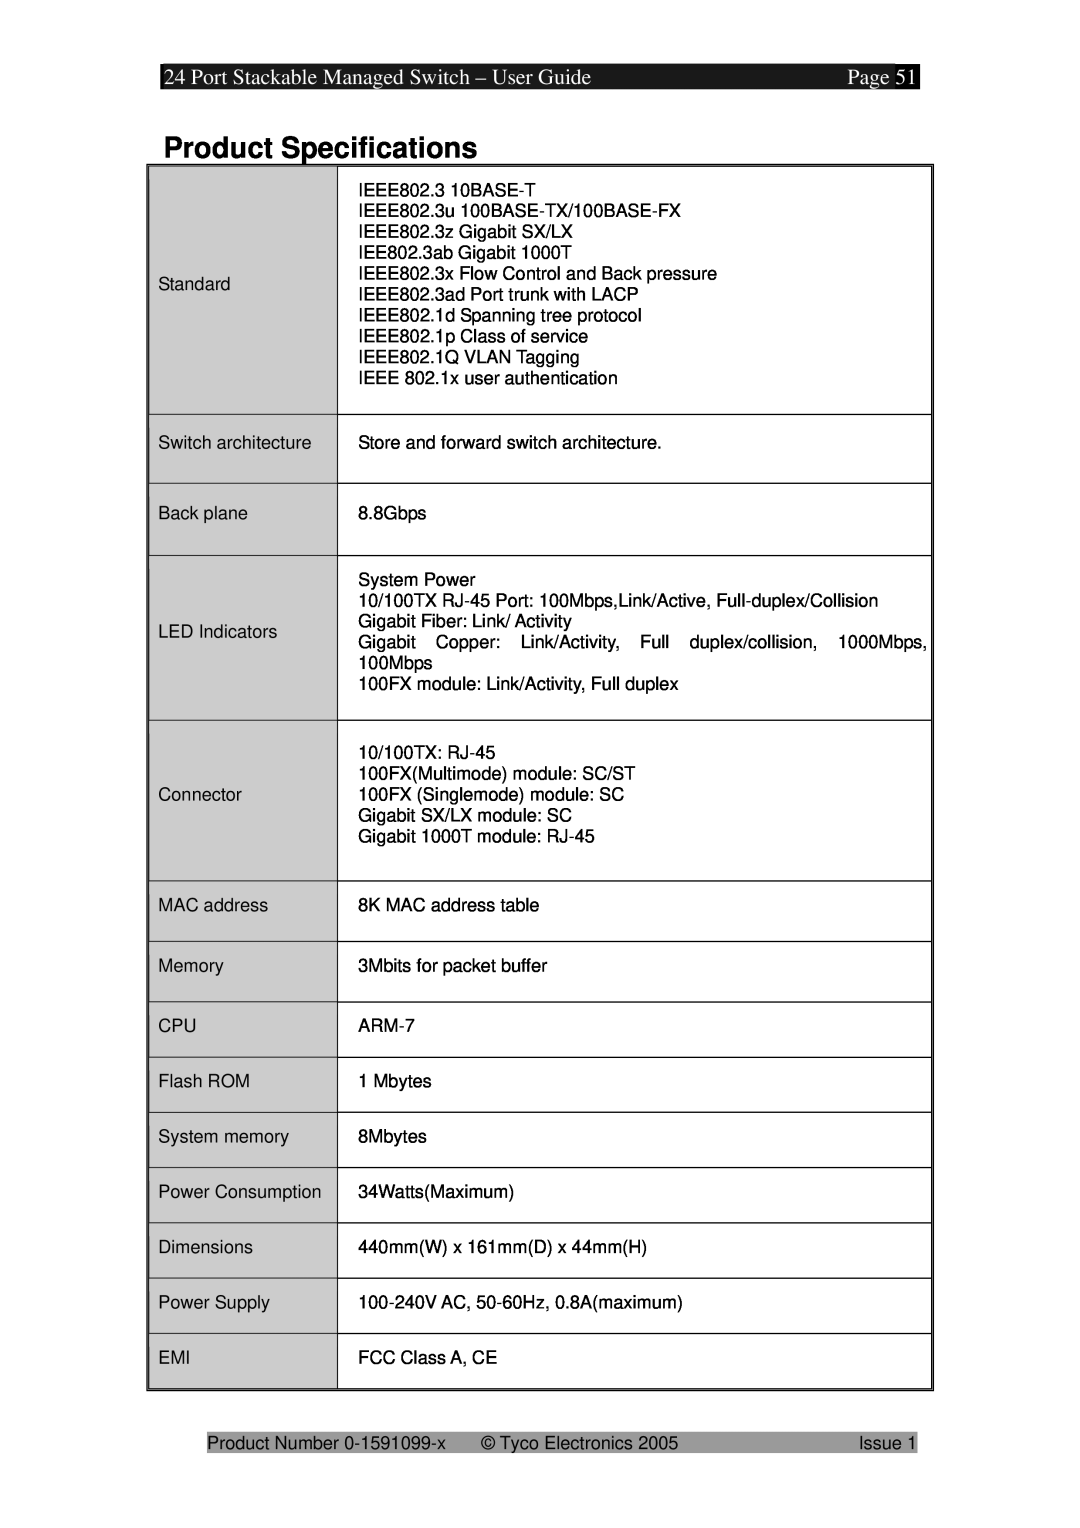 Tyco 0-1591099-x manual Product Specifications, Port Stackable Managed Switch - User GuidePage 